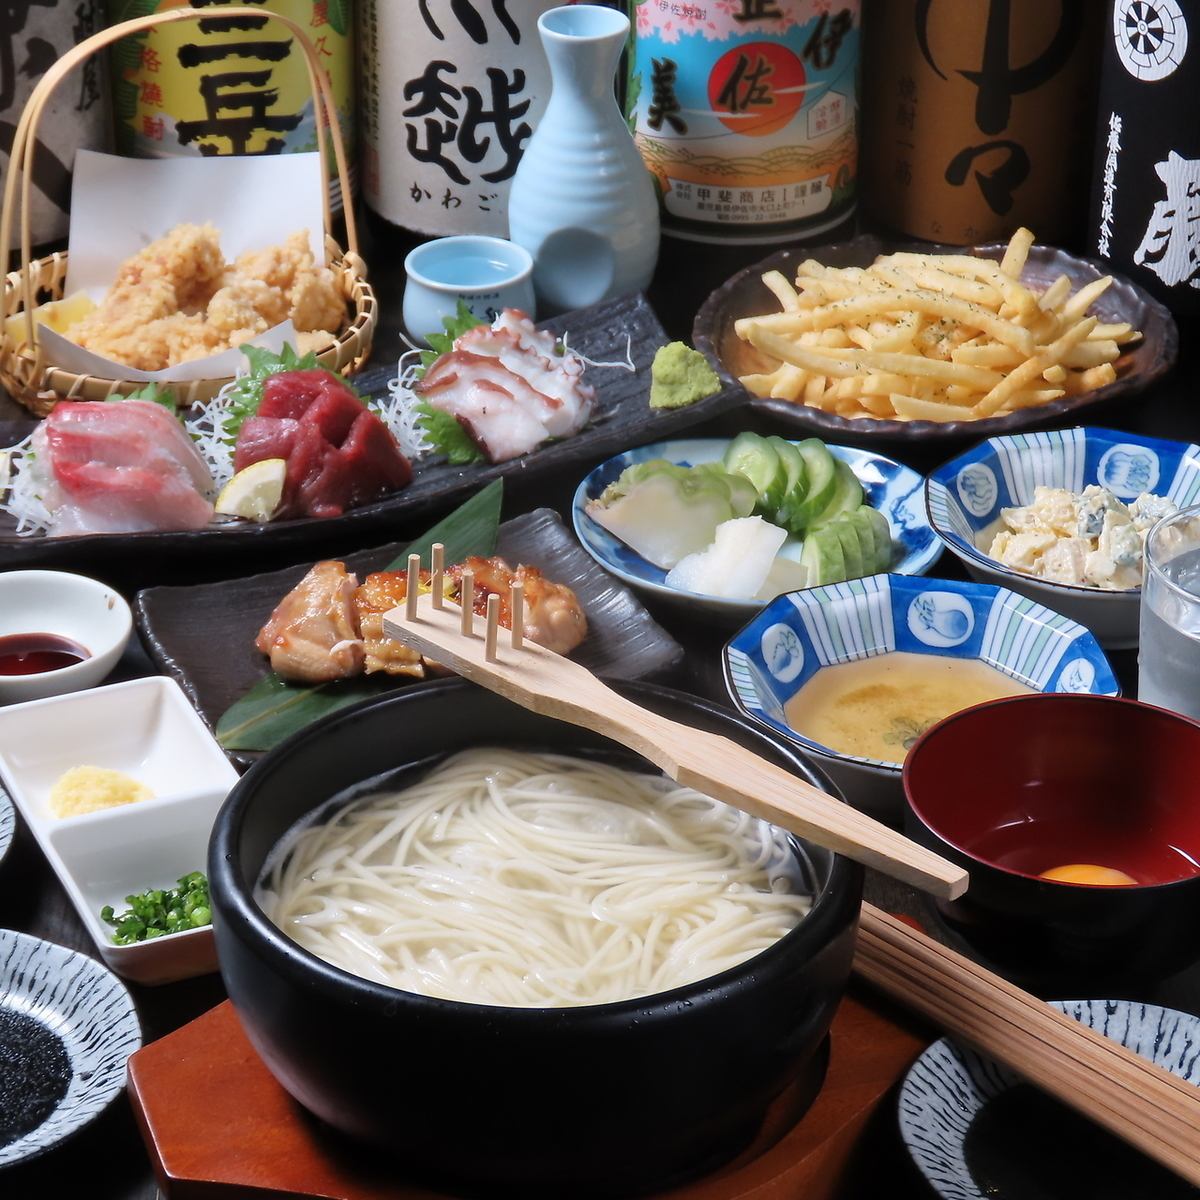 A hidden Japanese izakaya in Shibuya◆Enjoy exquisite cuisine from all over Japan in a cozy atmosphere